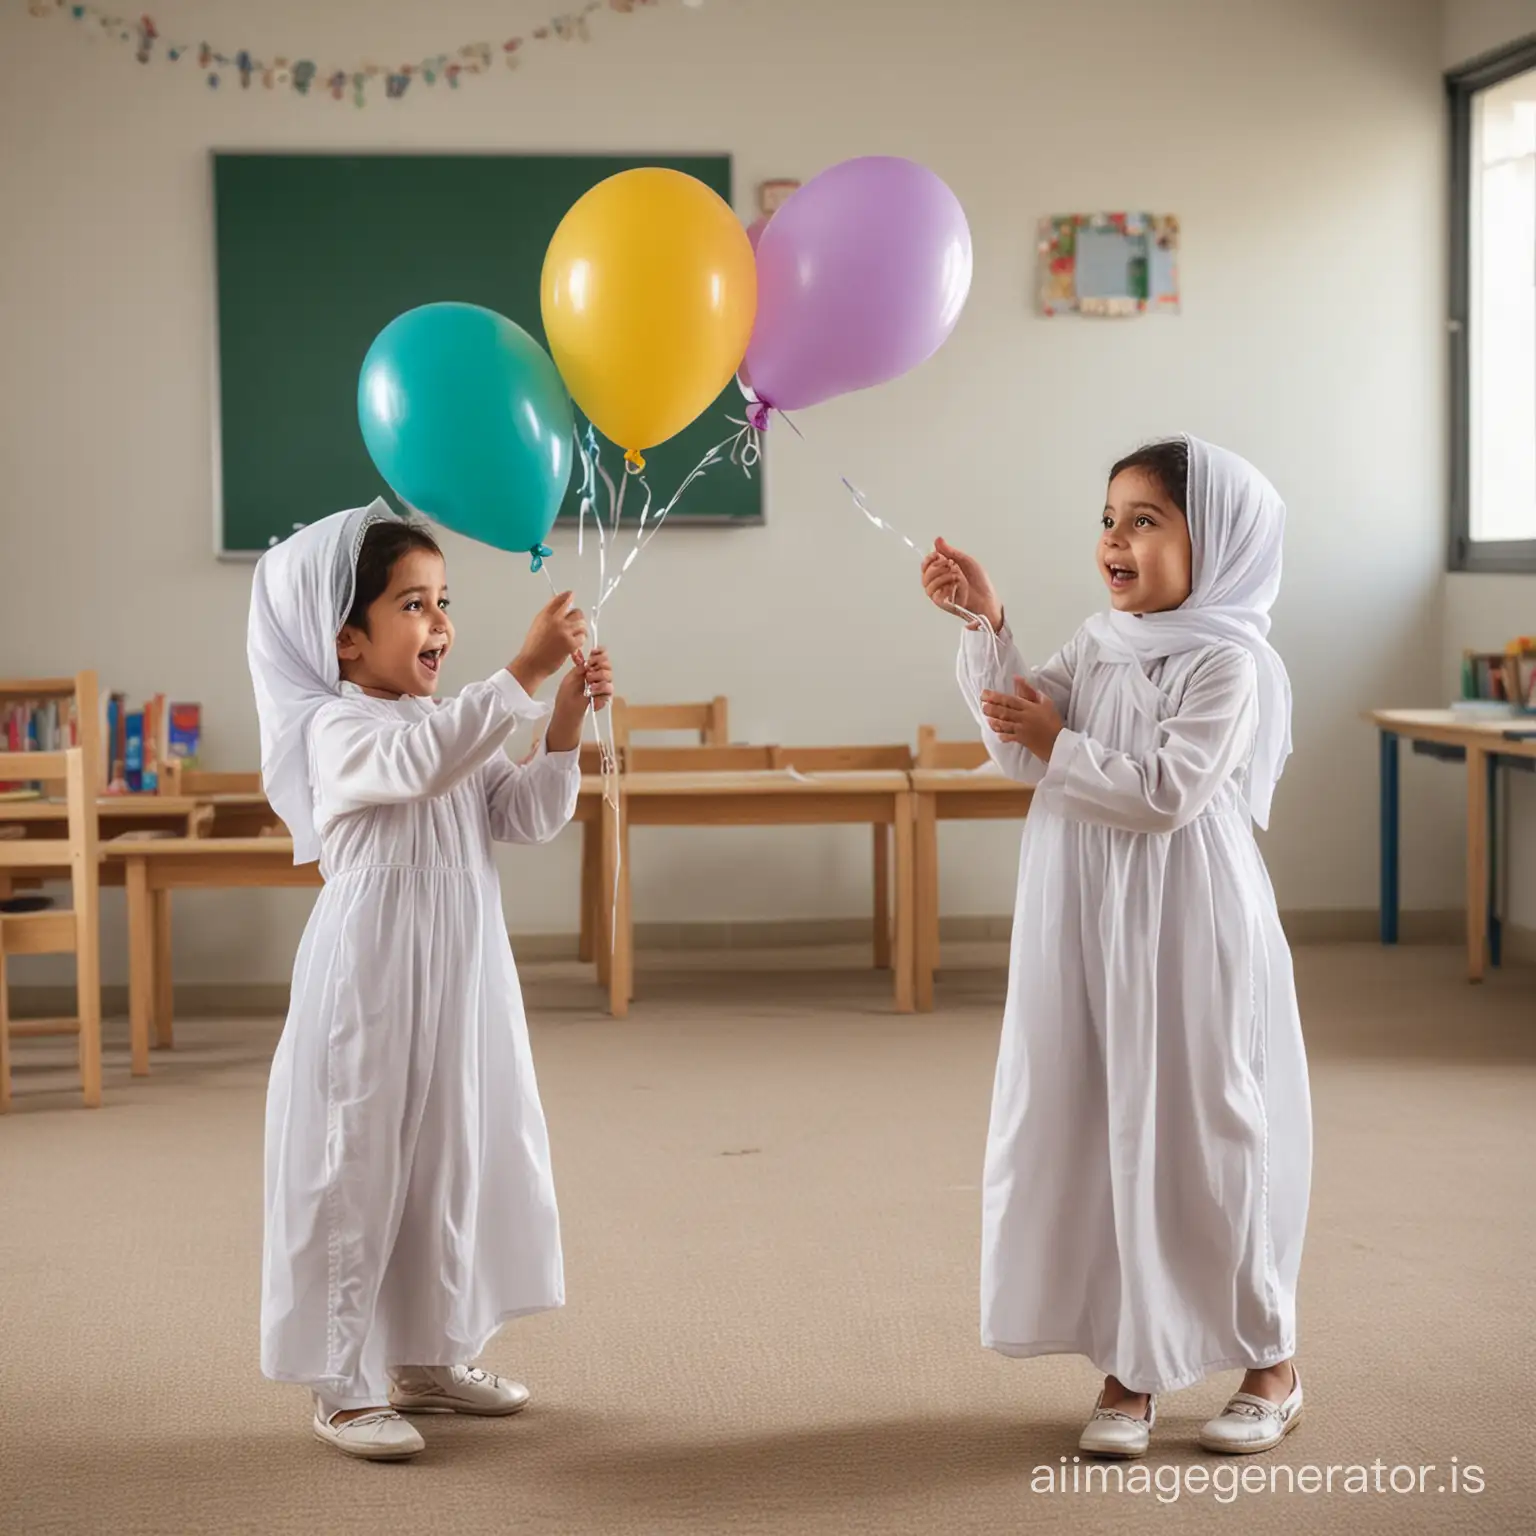 Young children holding two balloons, playing and celebrating Eid al-Fitr in the classroom